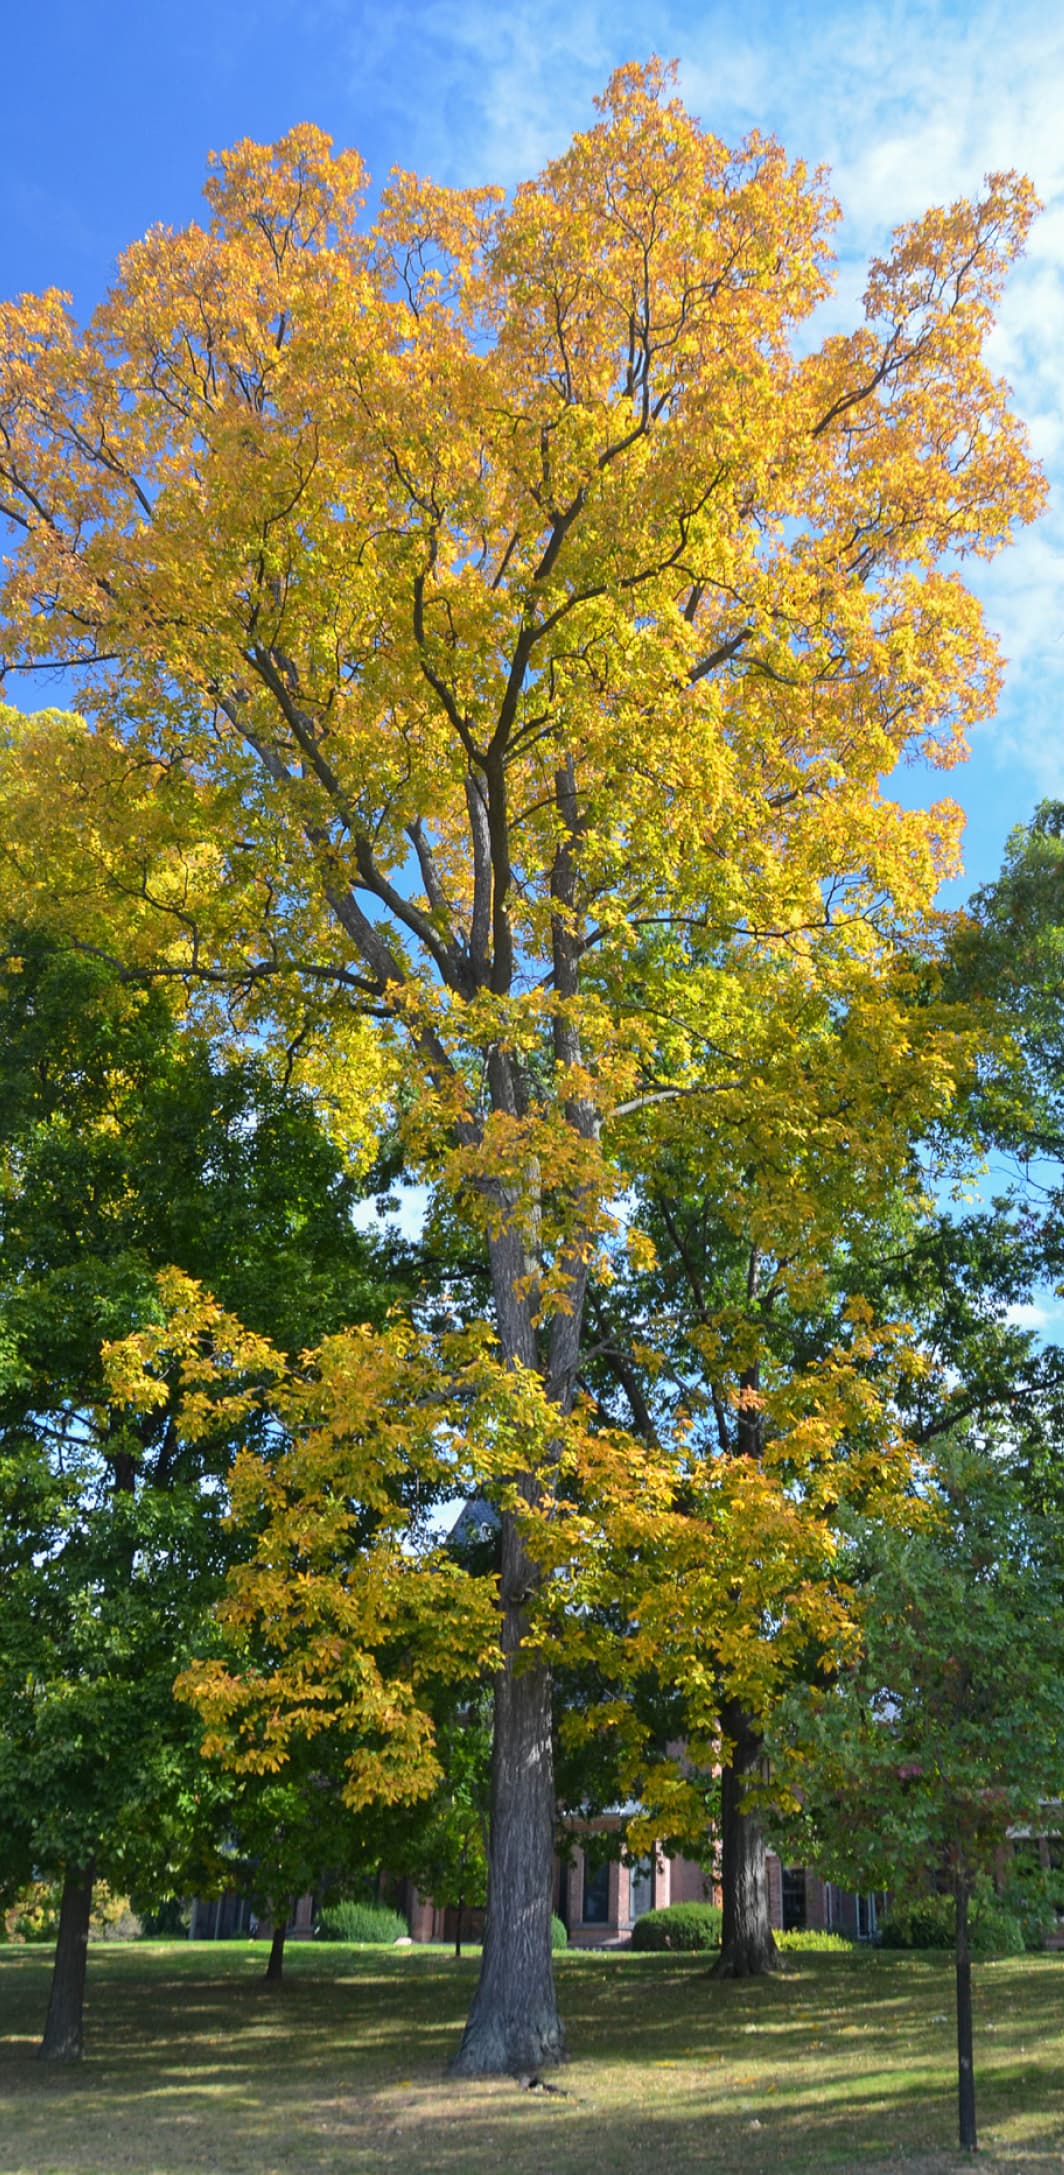 A solitary large-leaved hickory (Carya tomentosa) in autumn colours.